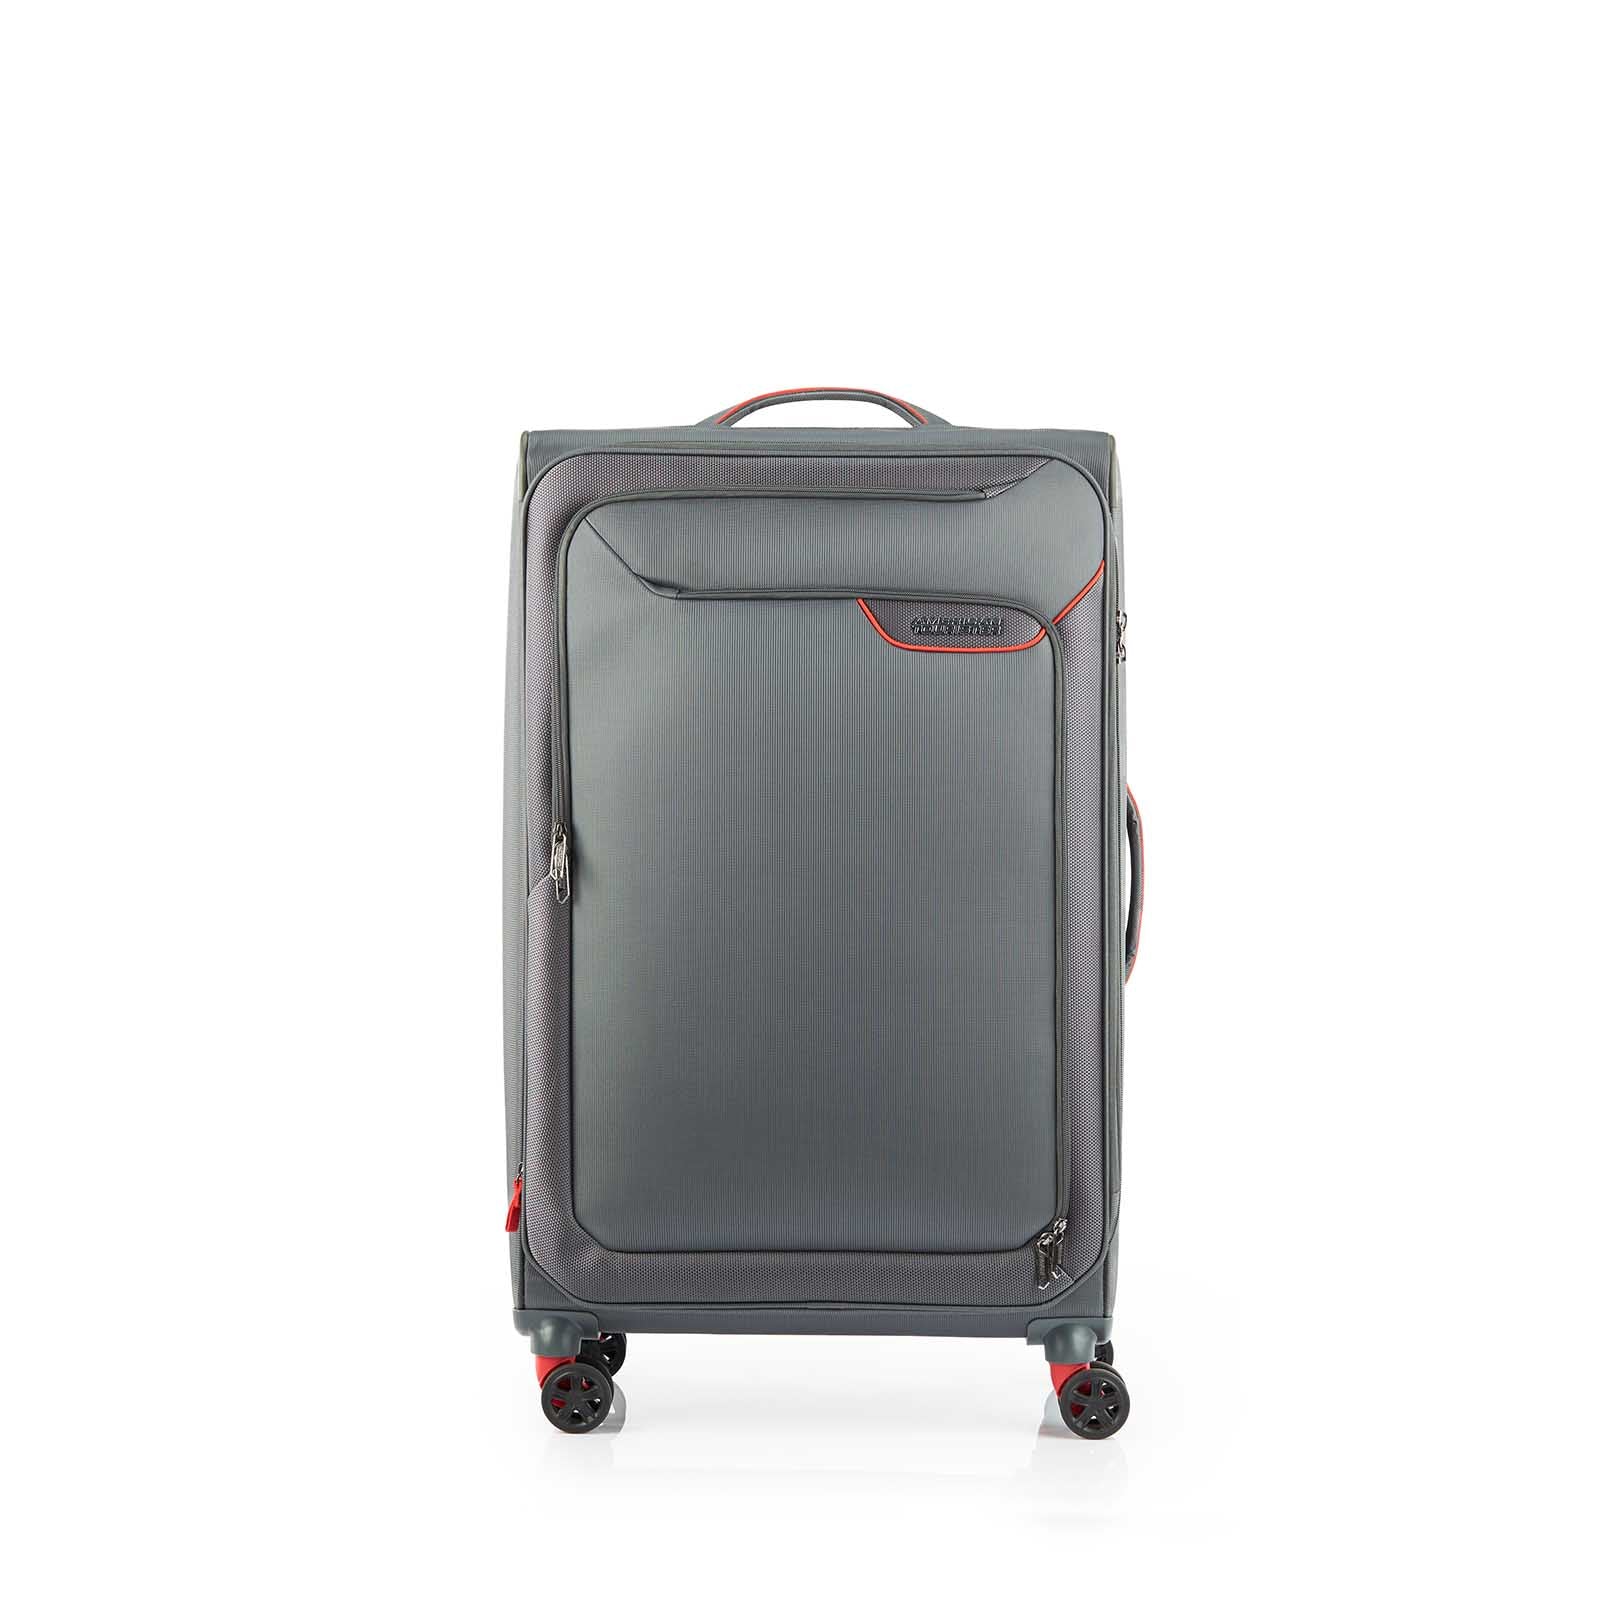 American-Tourister-Applite-4-Eco-82cm-Suitcase-Grey-Red-Front